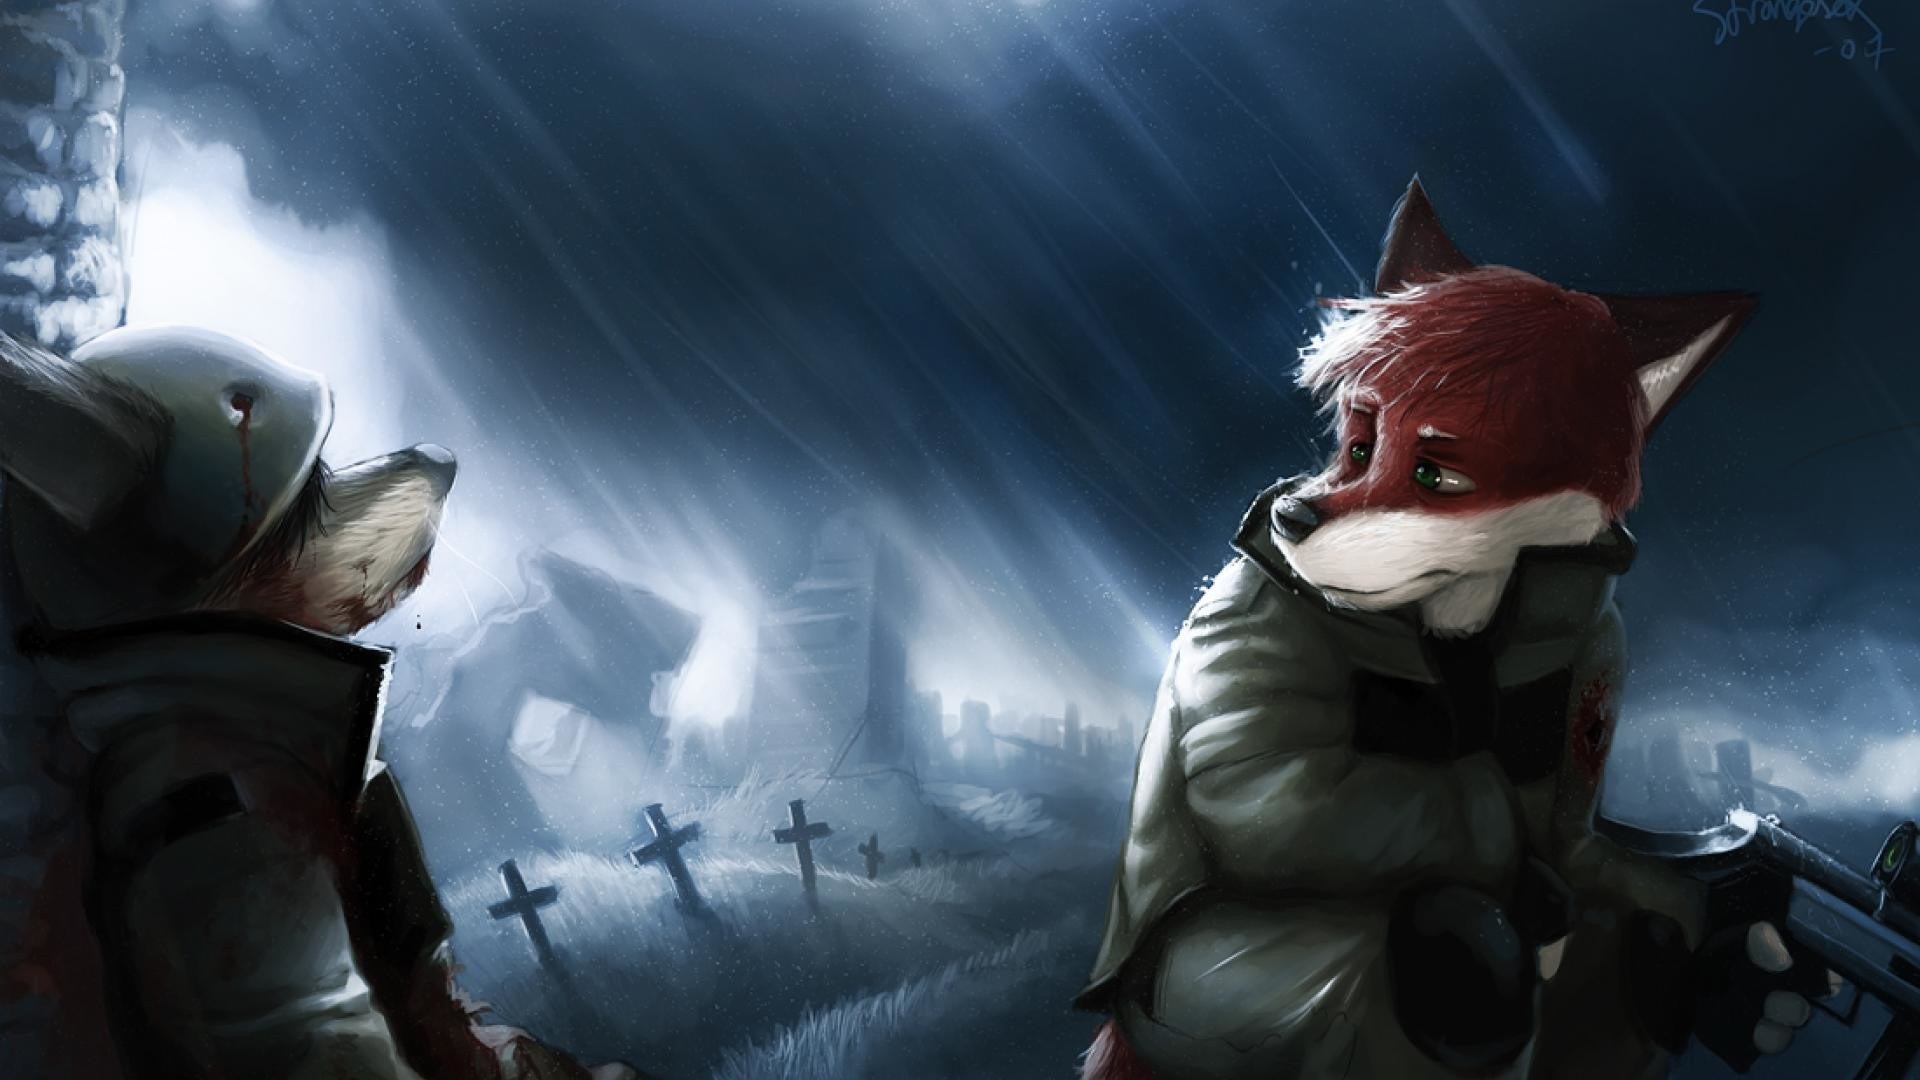 1920x1080 ... Furry Wolf Wallpaper 1920 1080 Galleryimage co